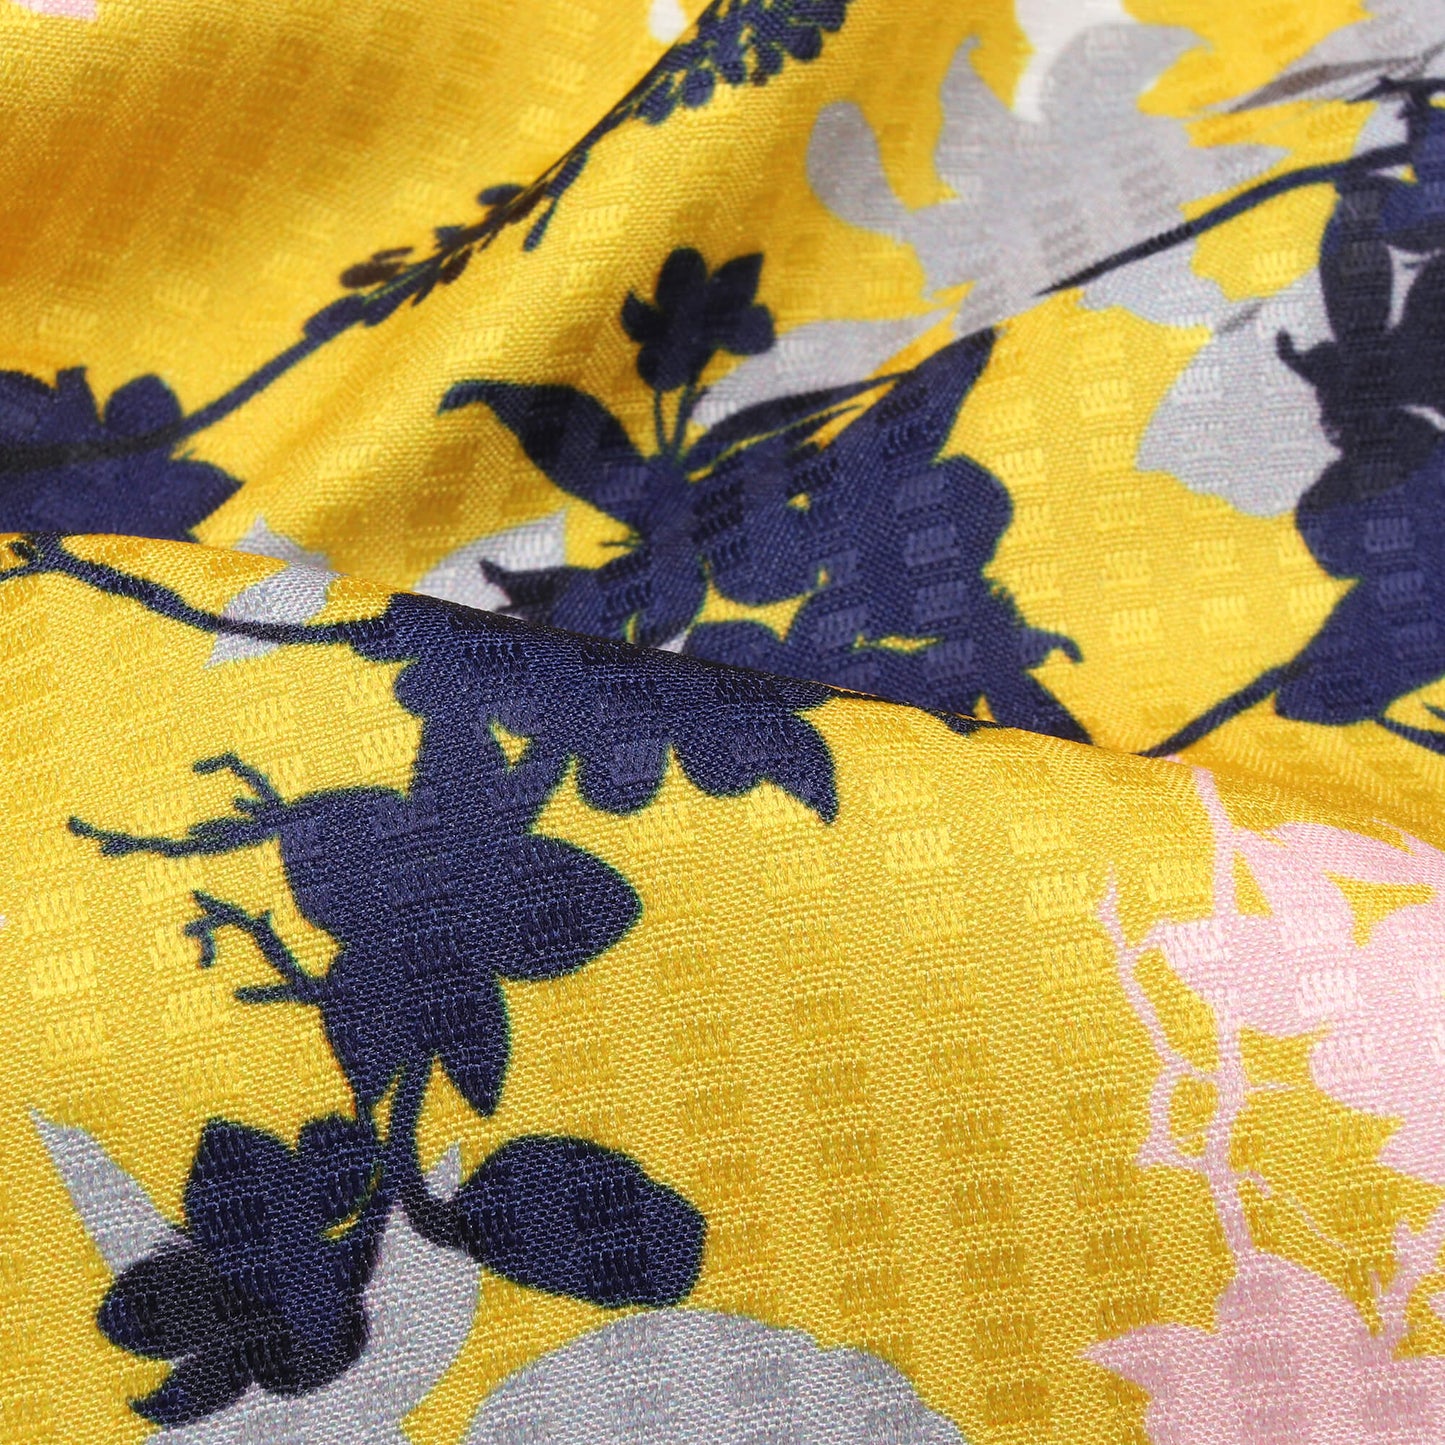 Corn Yellow And Navy Blue Floral Pattern Digital Print Sherwani Fabric (Width 58 Inches)